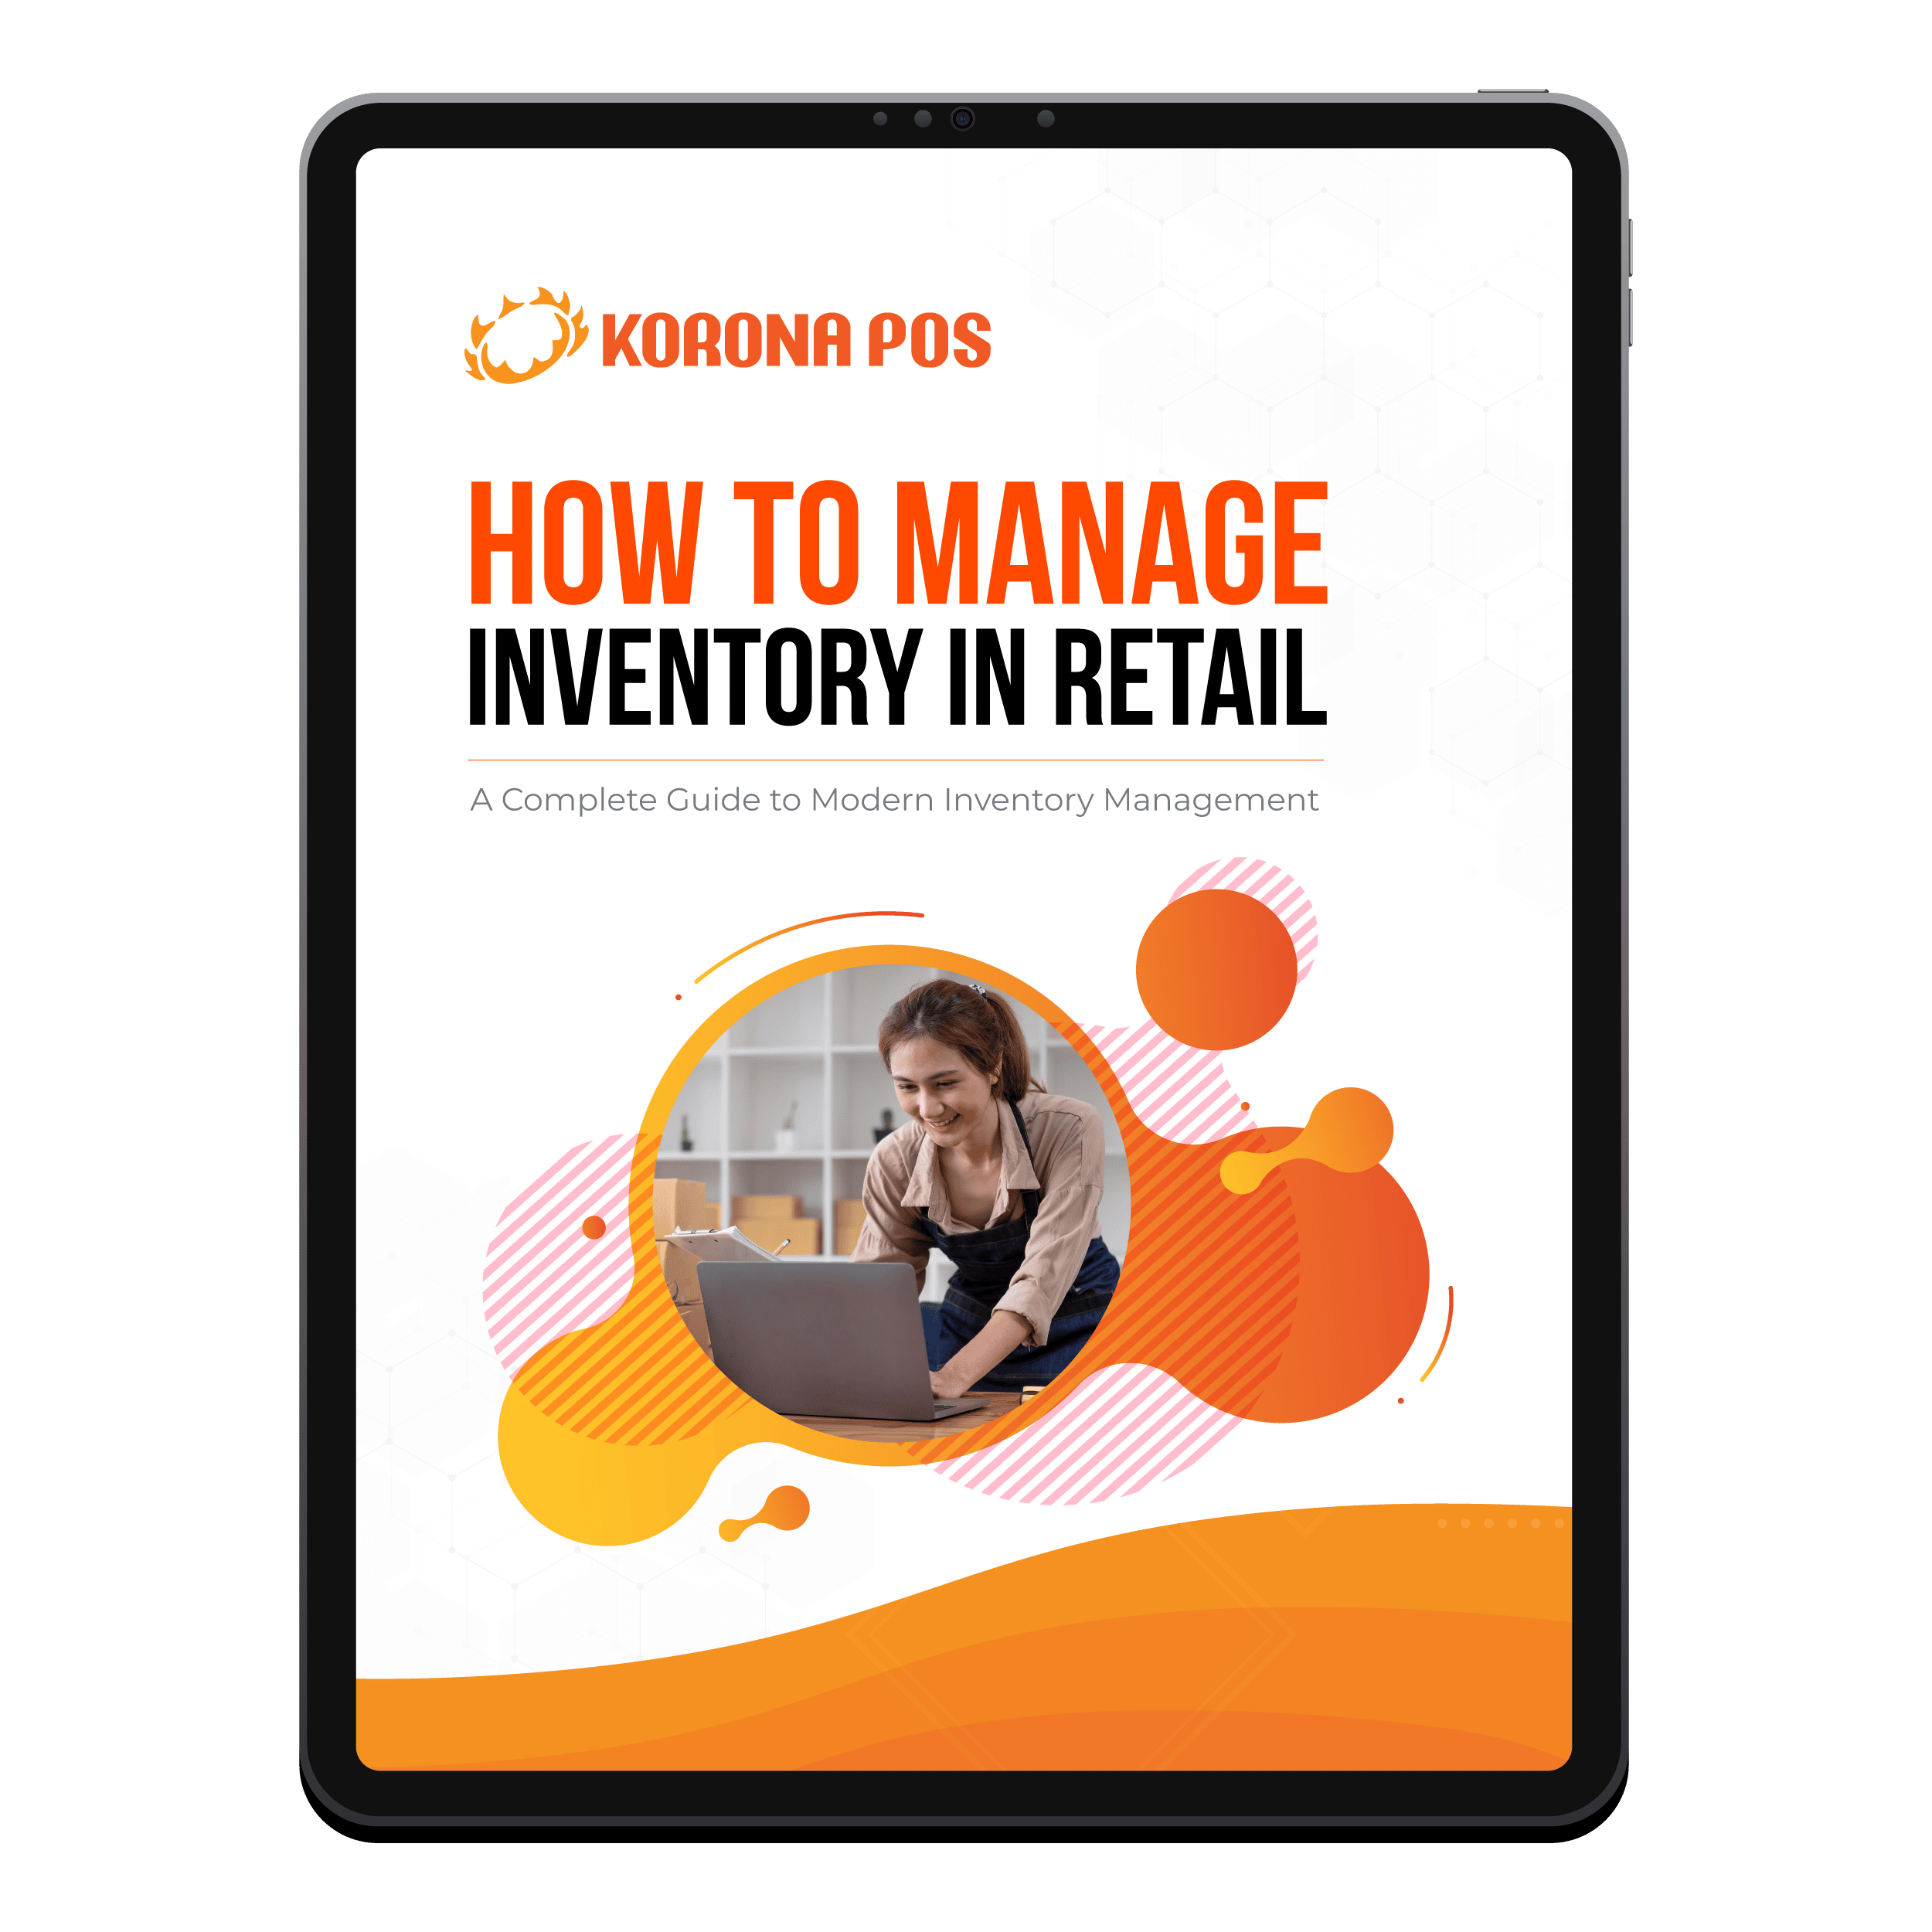 How to Manage Inventory in Retail Guide Cover